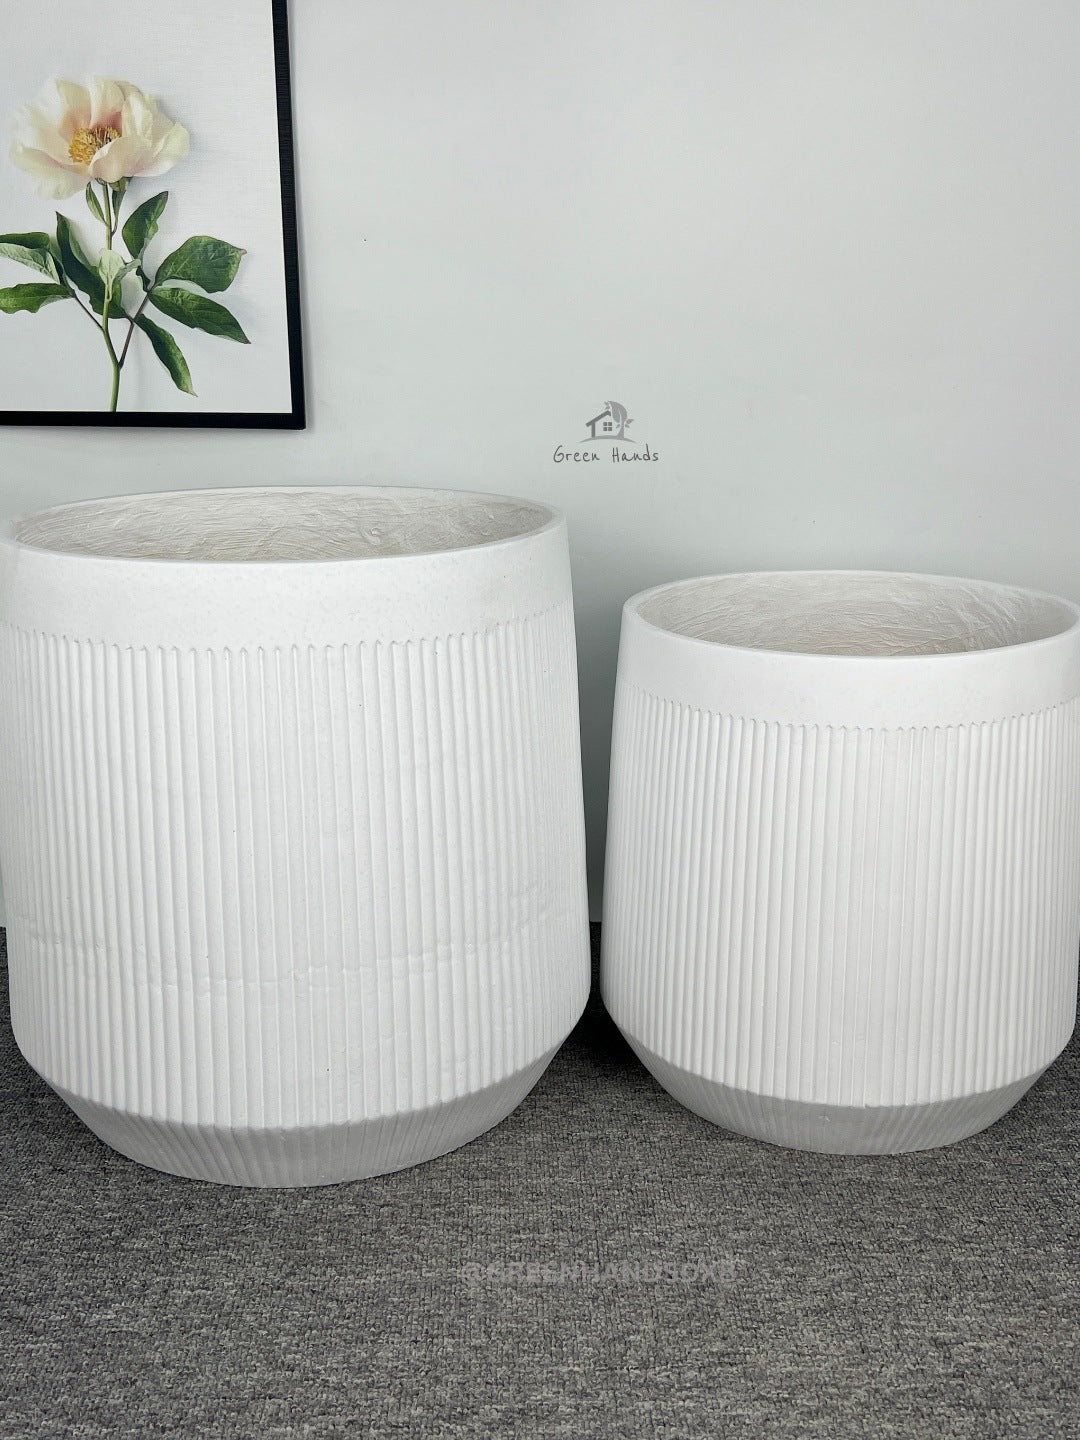 Elegant Ribbed Ficonstone Snow White Flower Pot with Drain Holes & Base Plate - Elevate Your Decor with a Touch of Elegance